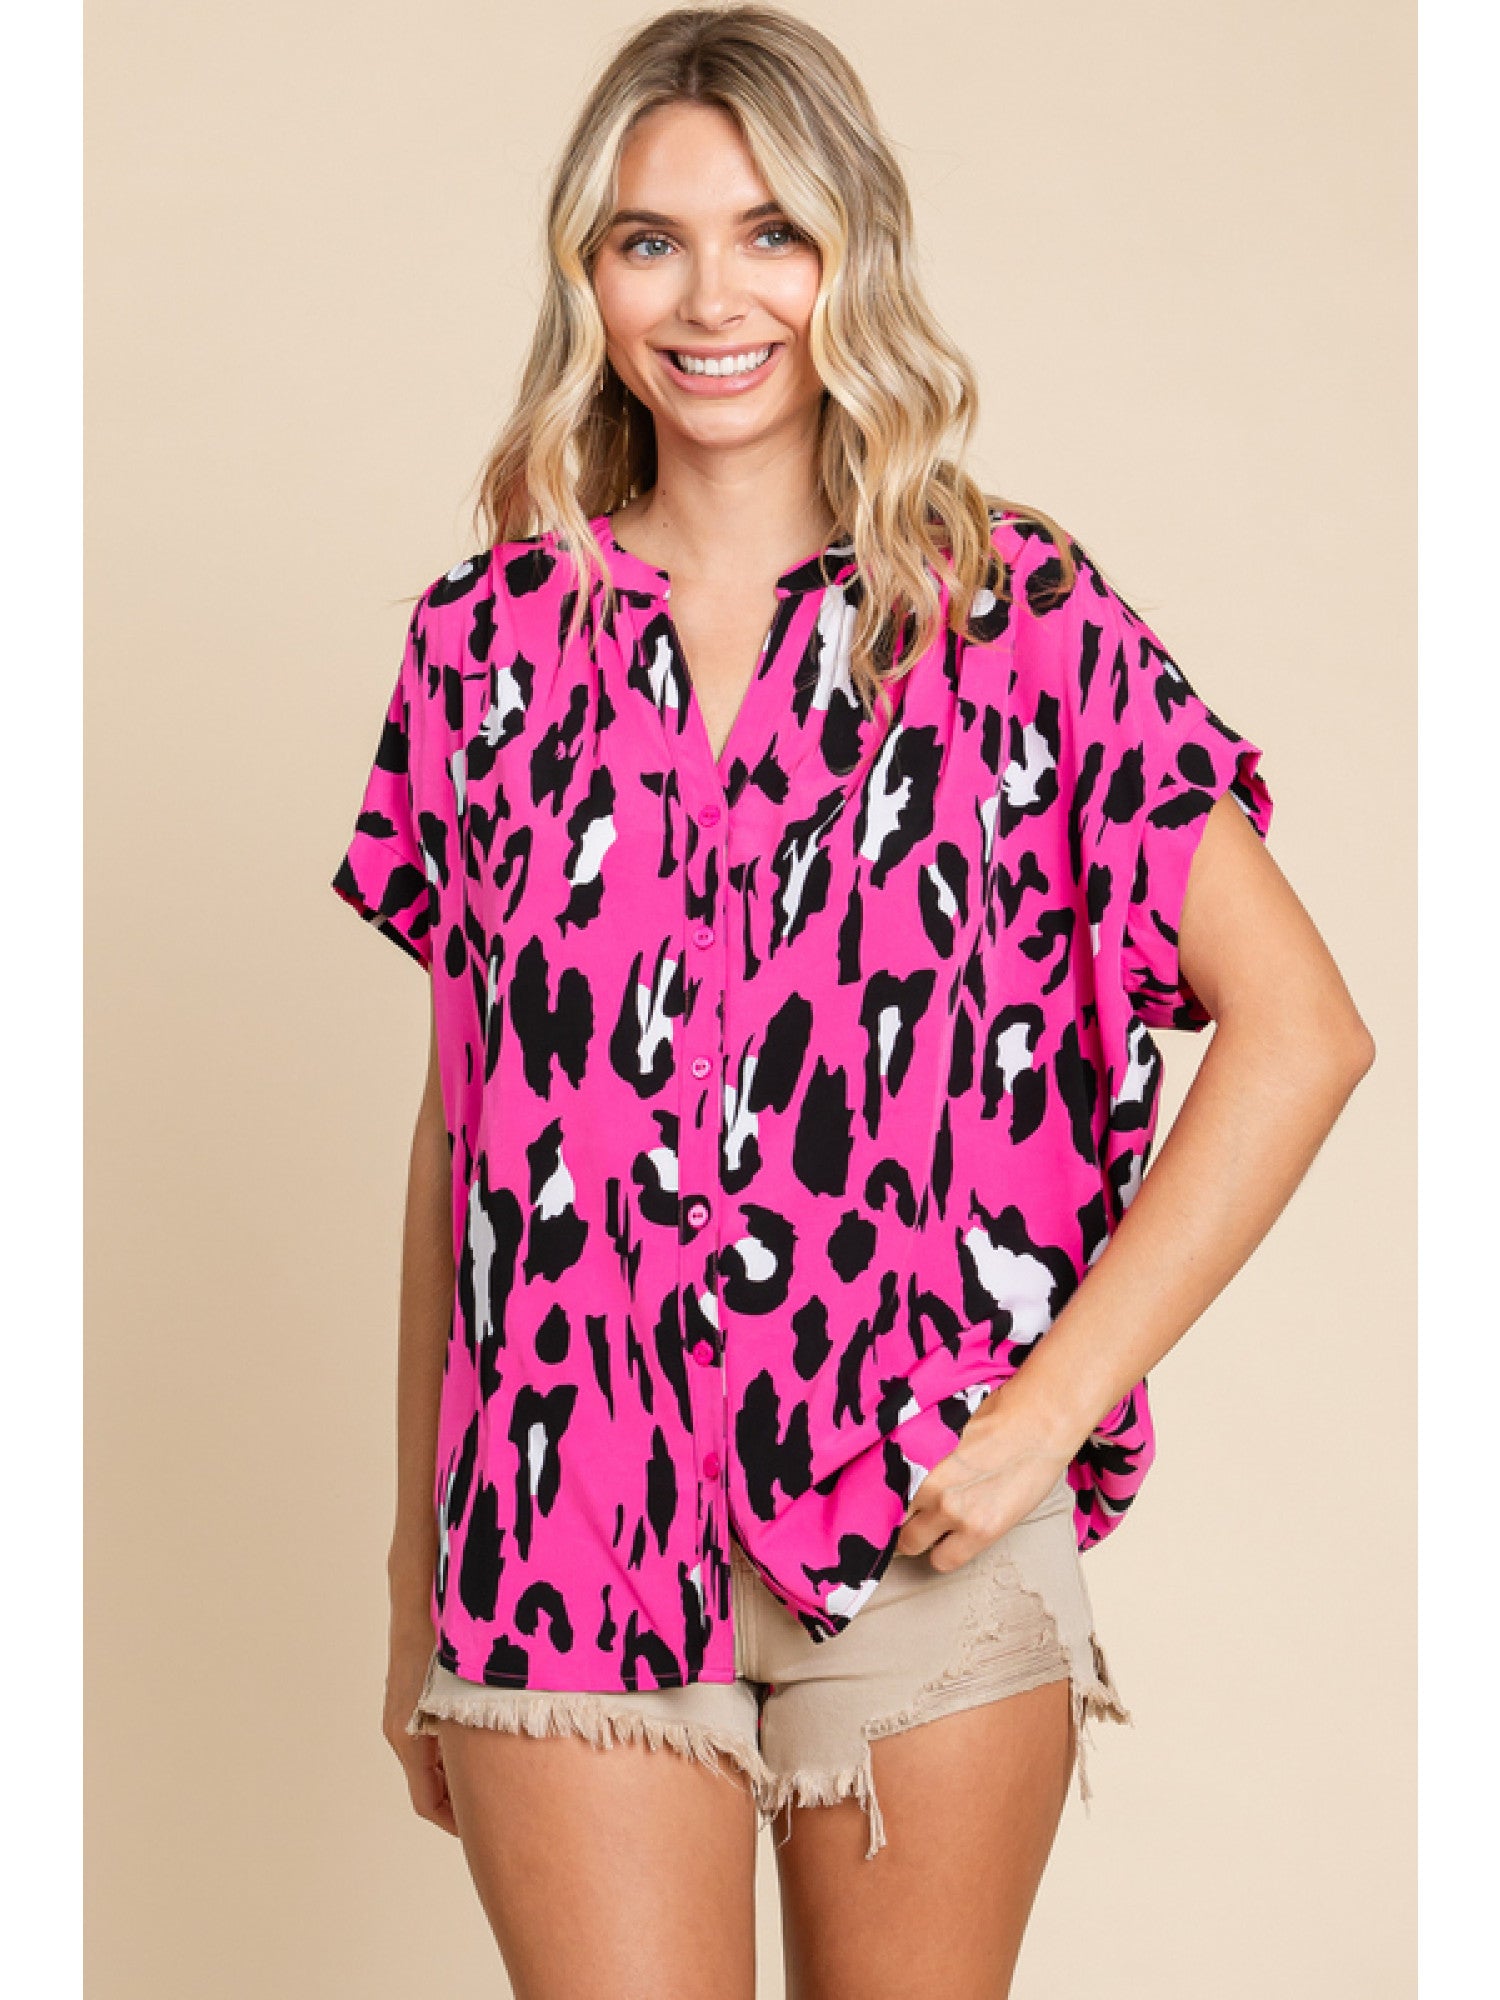 Lolla Leopard Top in Pink